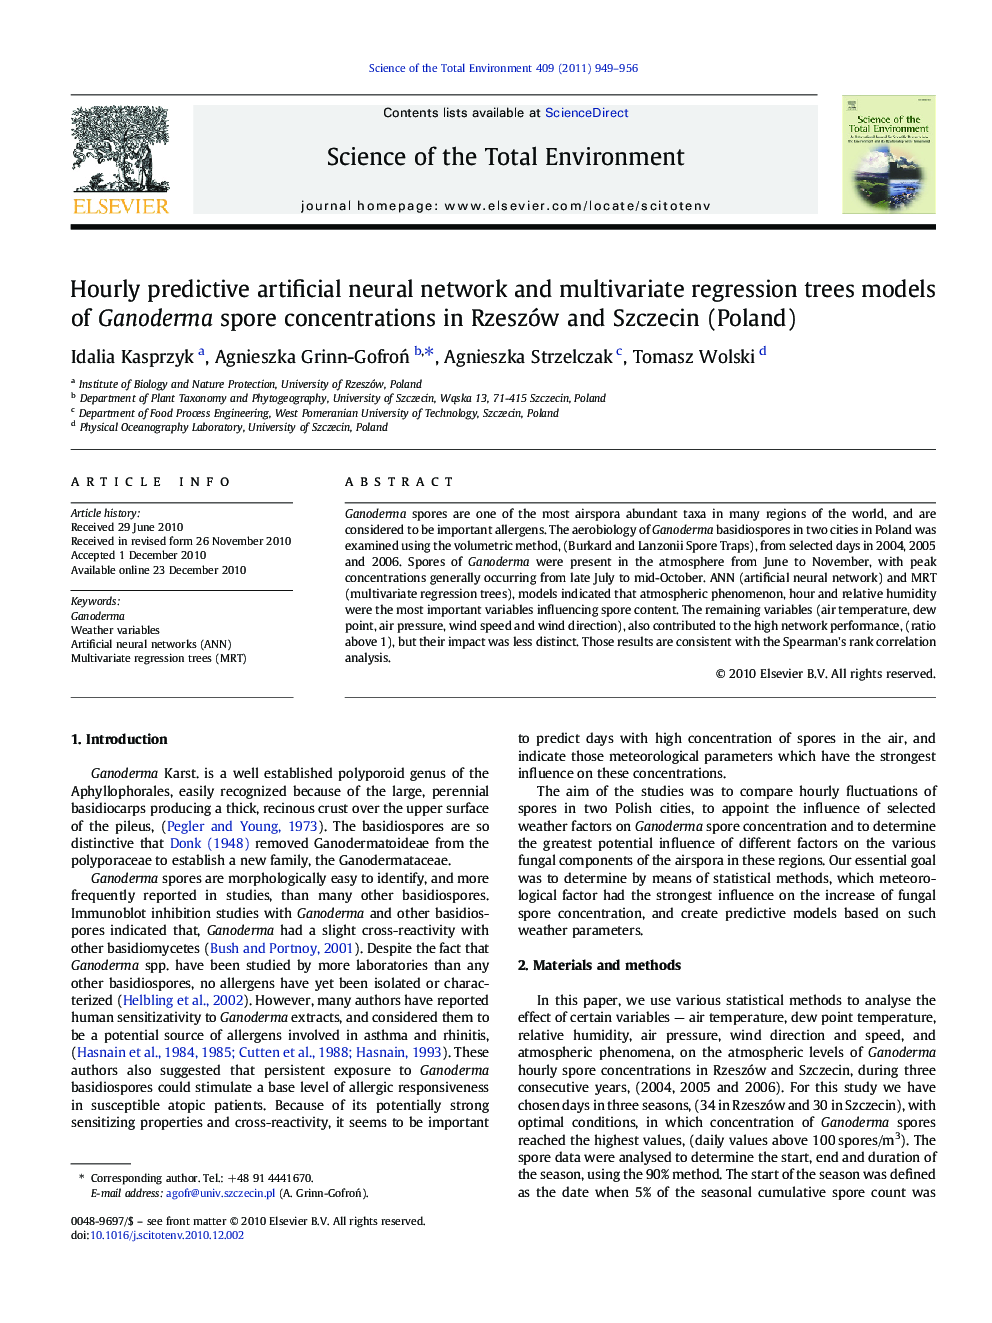 Hourly predictive artificial neural network and multivariate regression trees models of Ganoderma spore concentrations in Rzeszów and Szczecin (Poland)